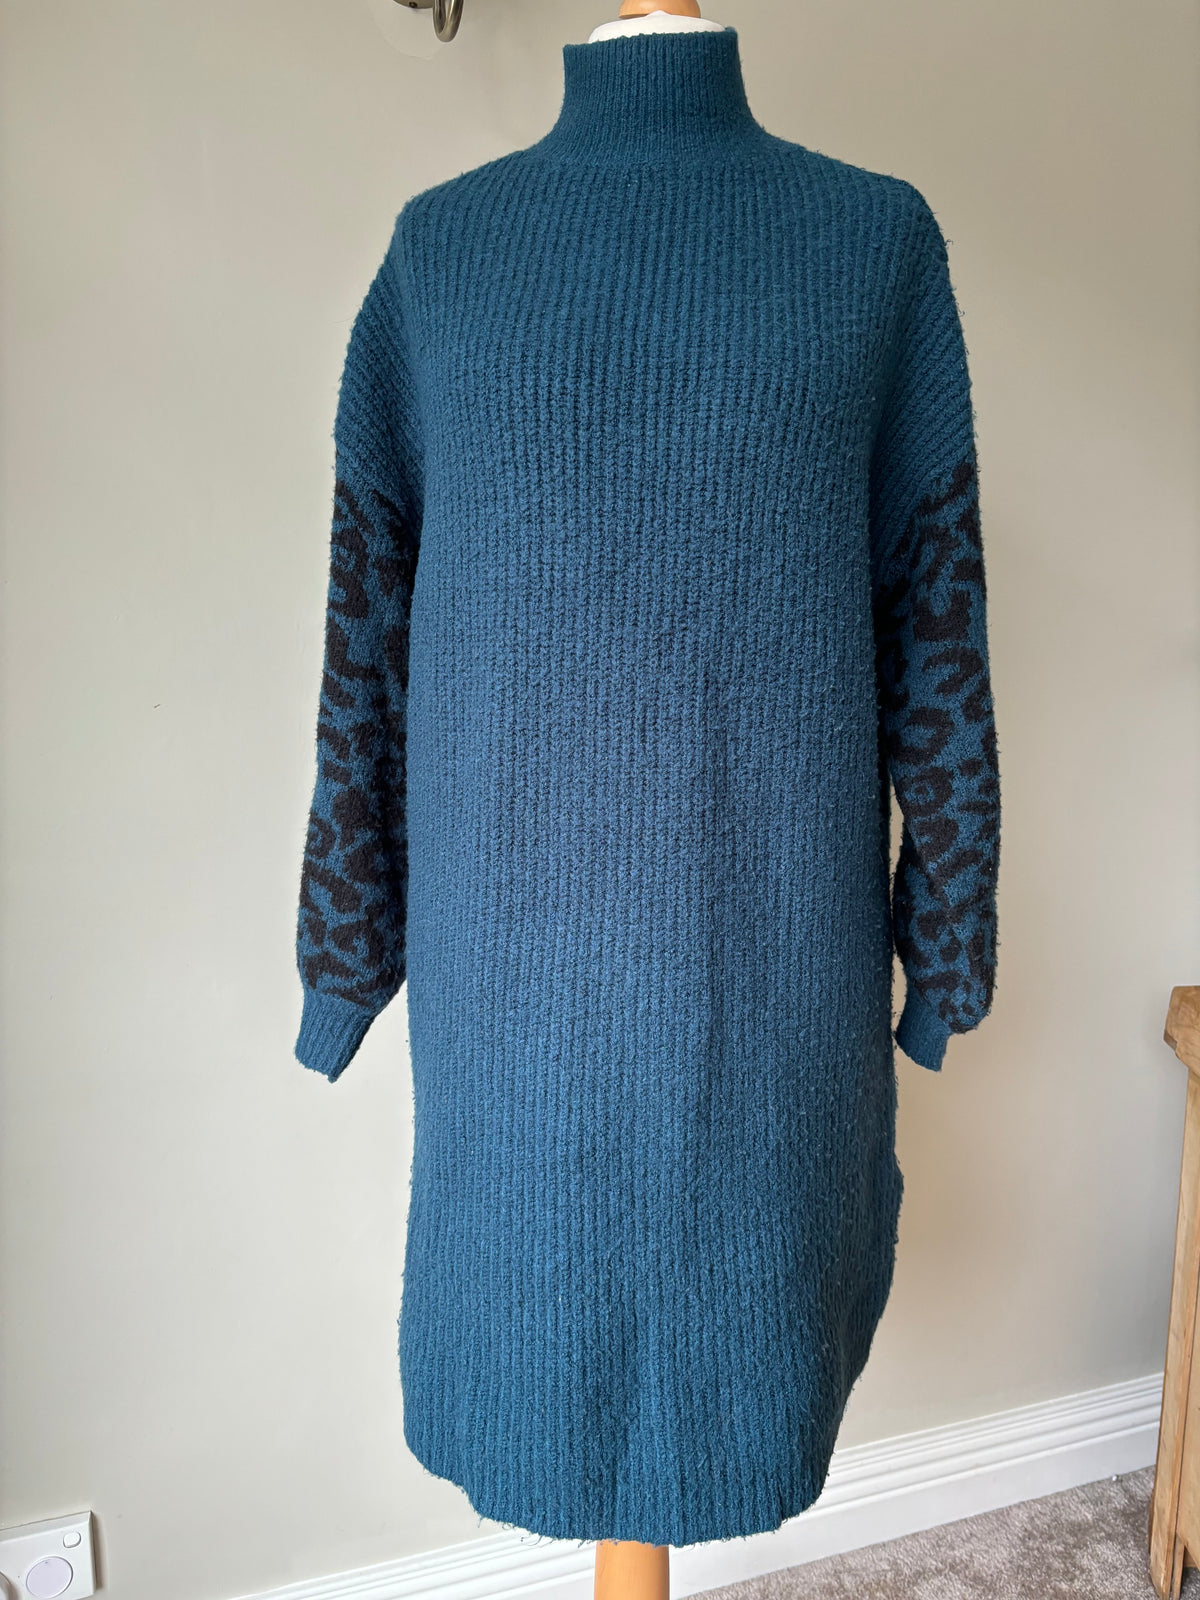 Knitted dress with leopard print Ballon Sleeves Size 12